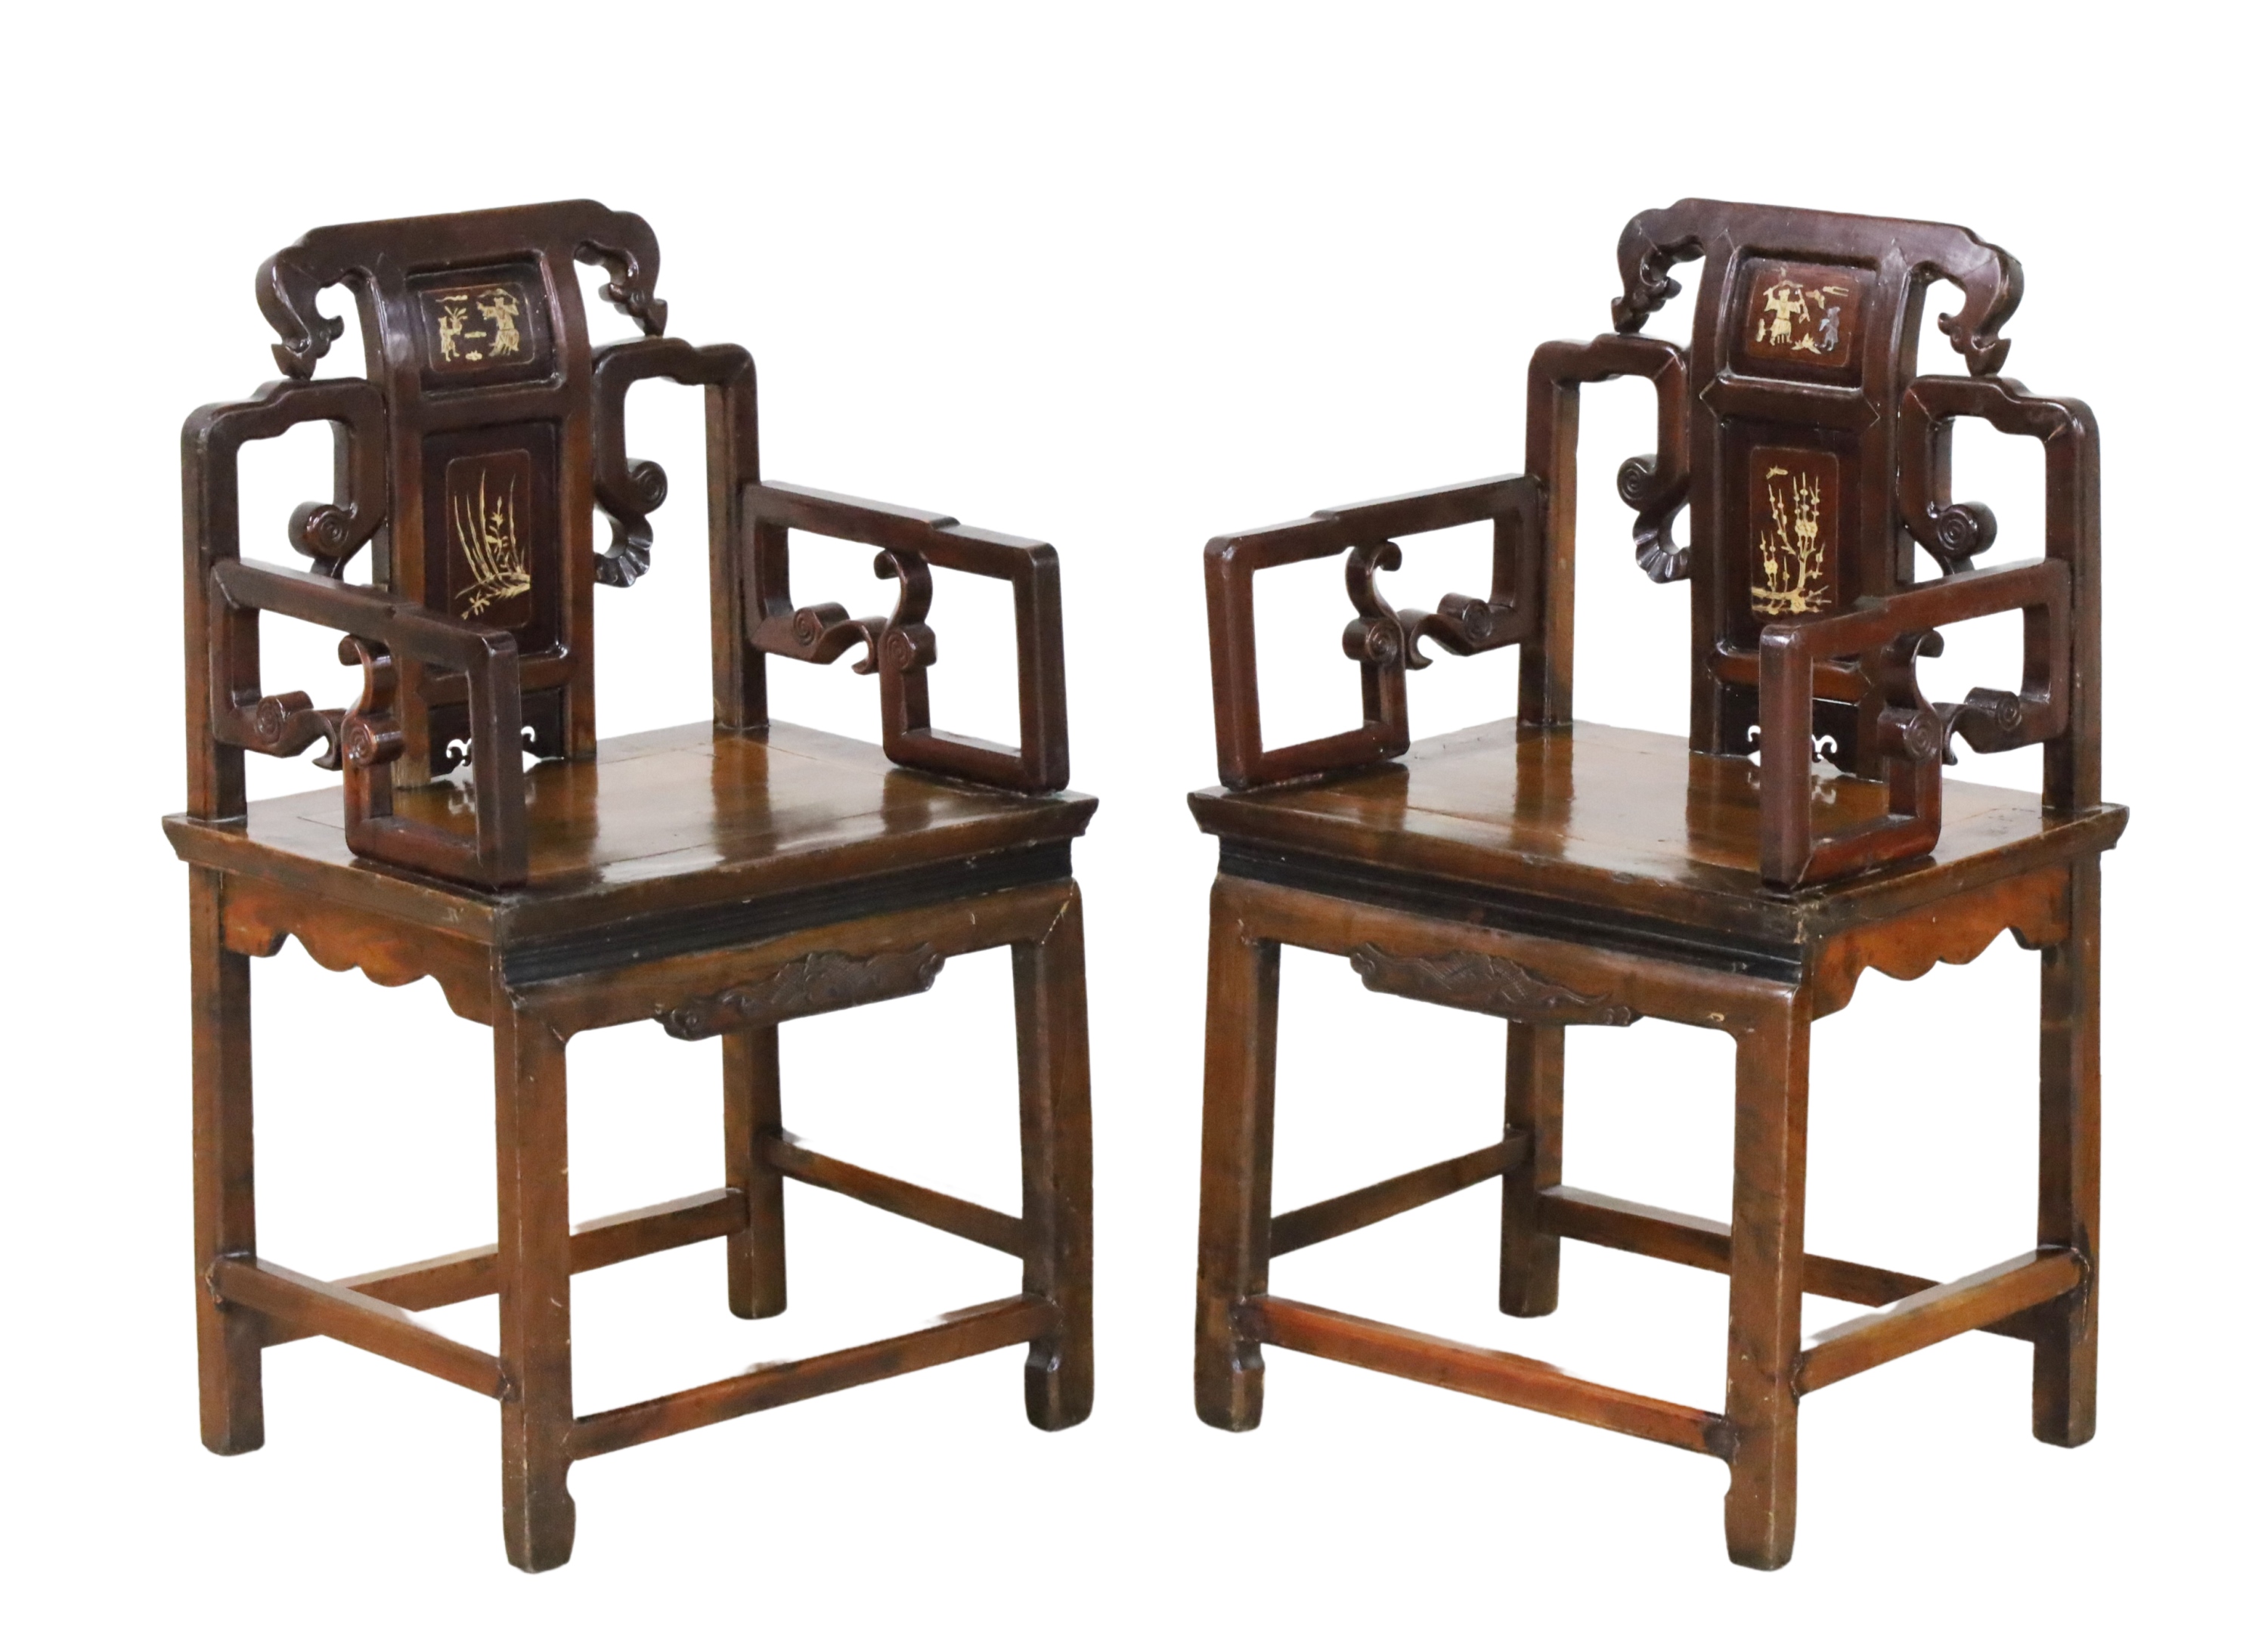 PAIR OF CHINESE CARVED HARDWOOD 2f8e37